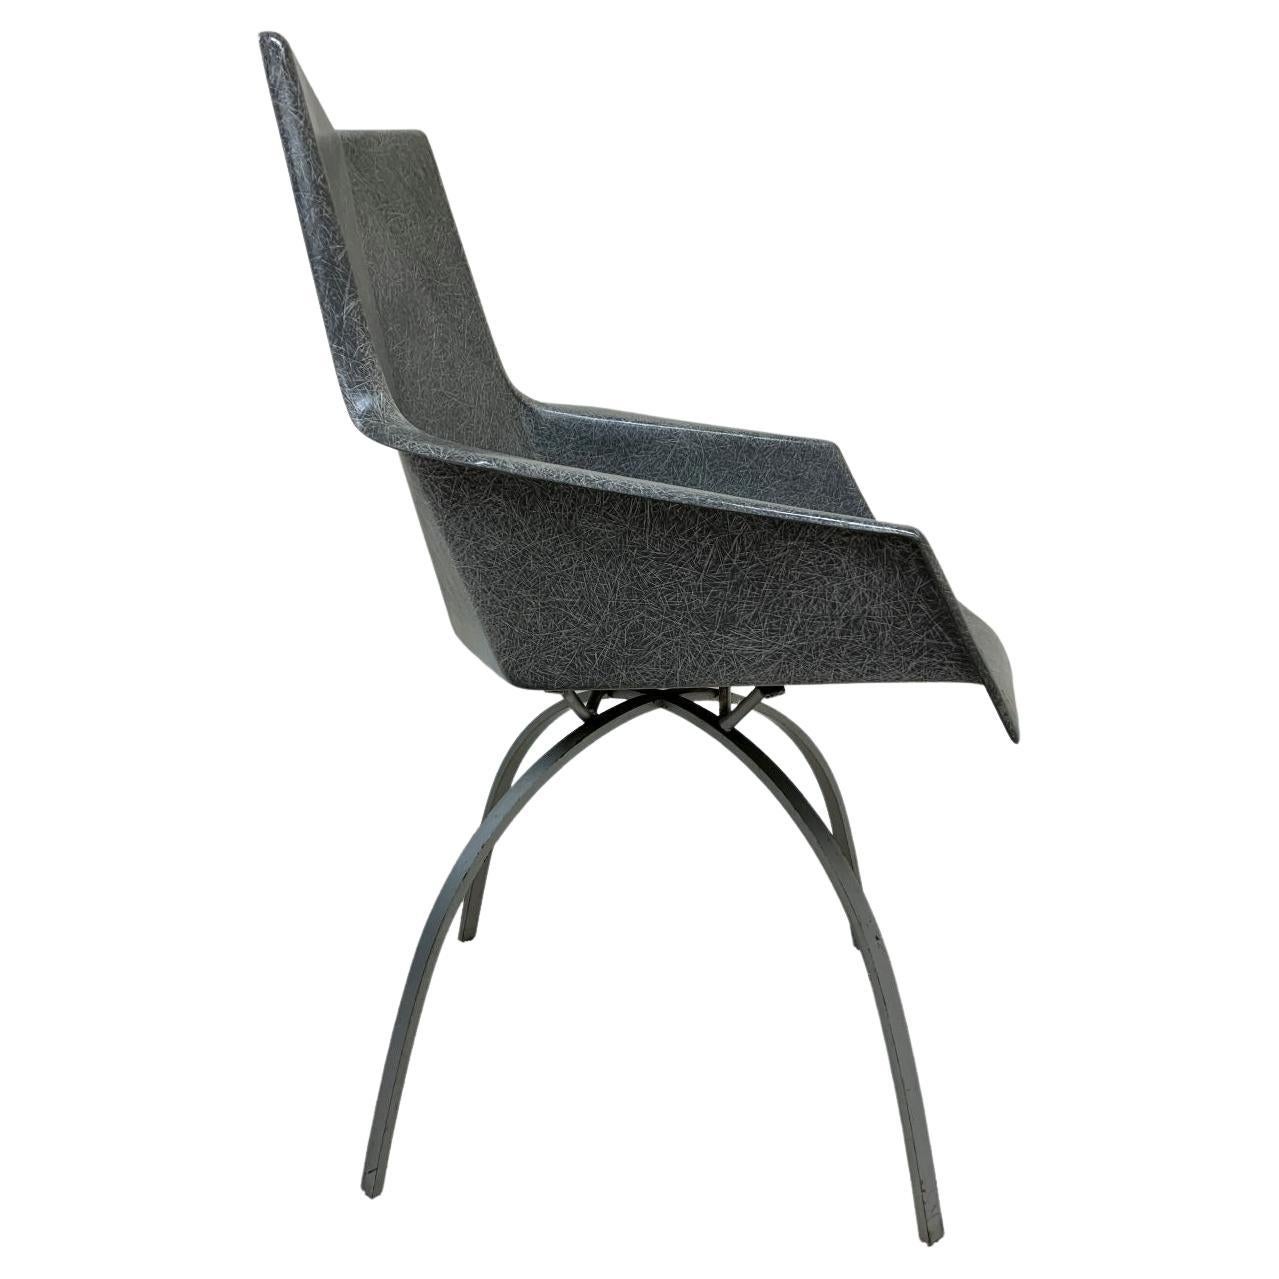 Mid-20th Century Iconic and Rare Origami Fiberglass Chair with Spider Leg Base by Paul McCobb